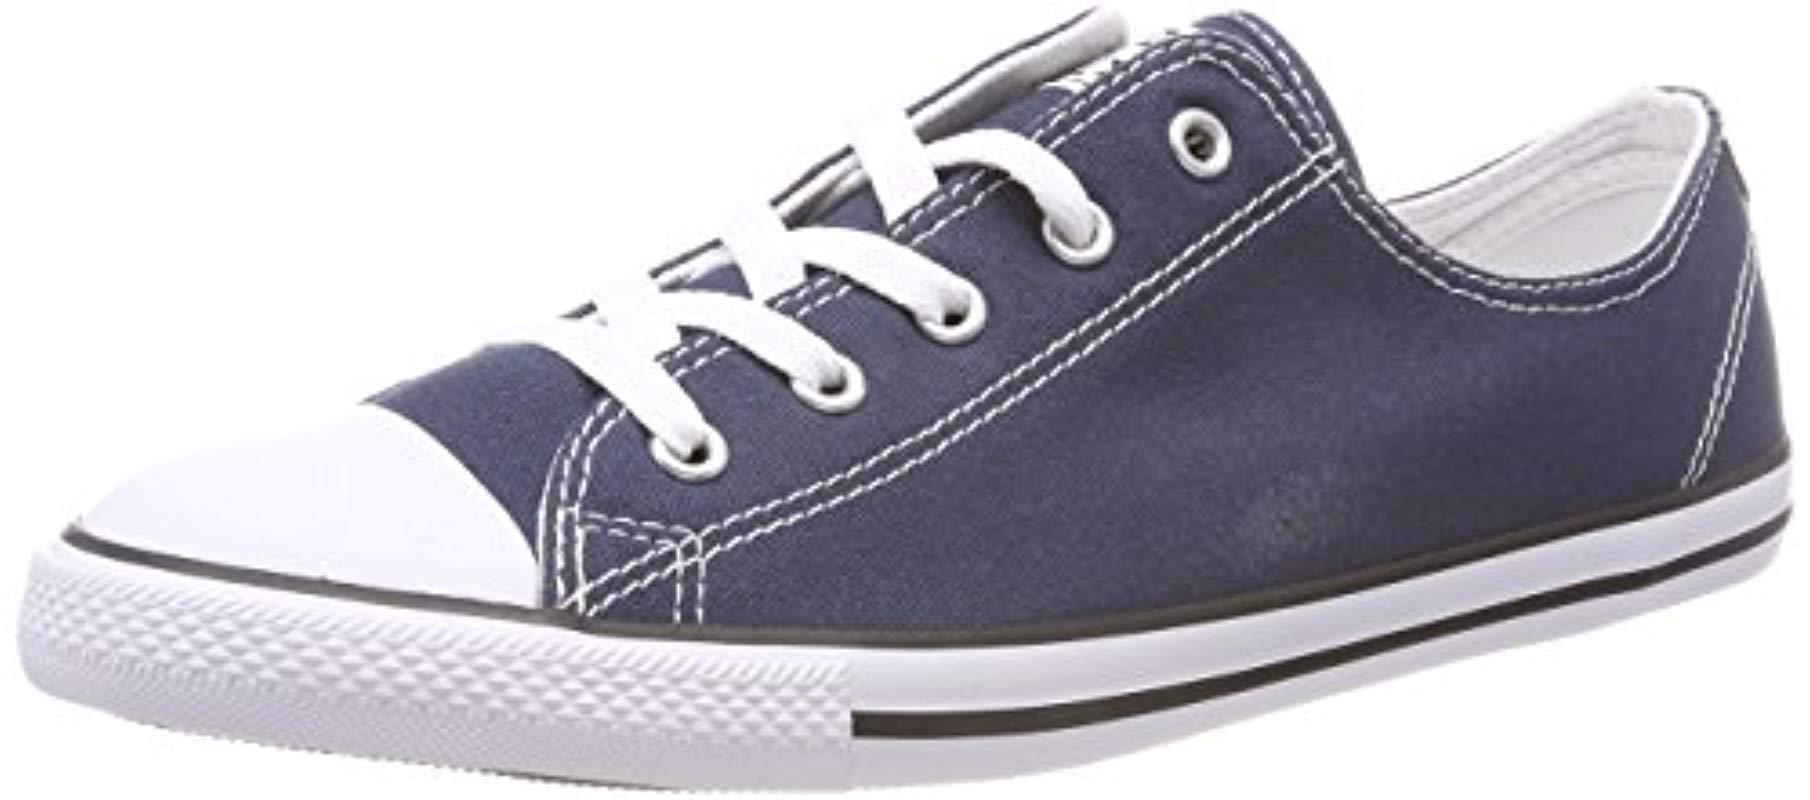 Converse Rubber 's As As Dainty Ox Trainers in Navy (Blue) - Lyst